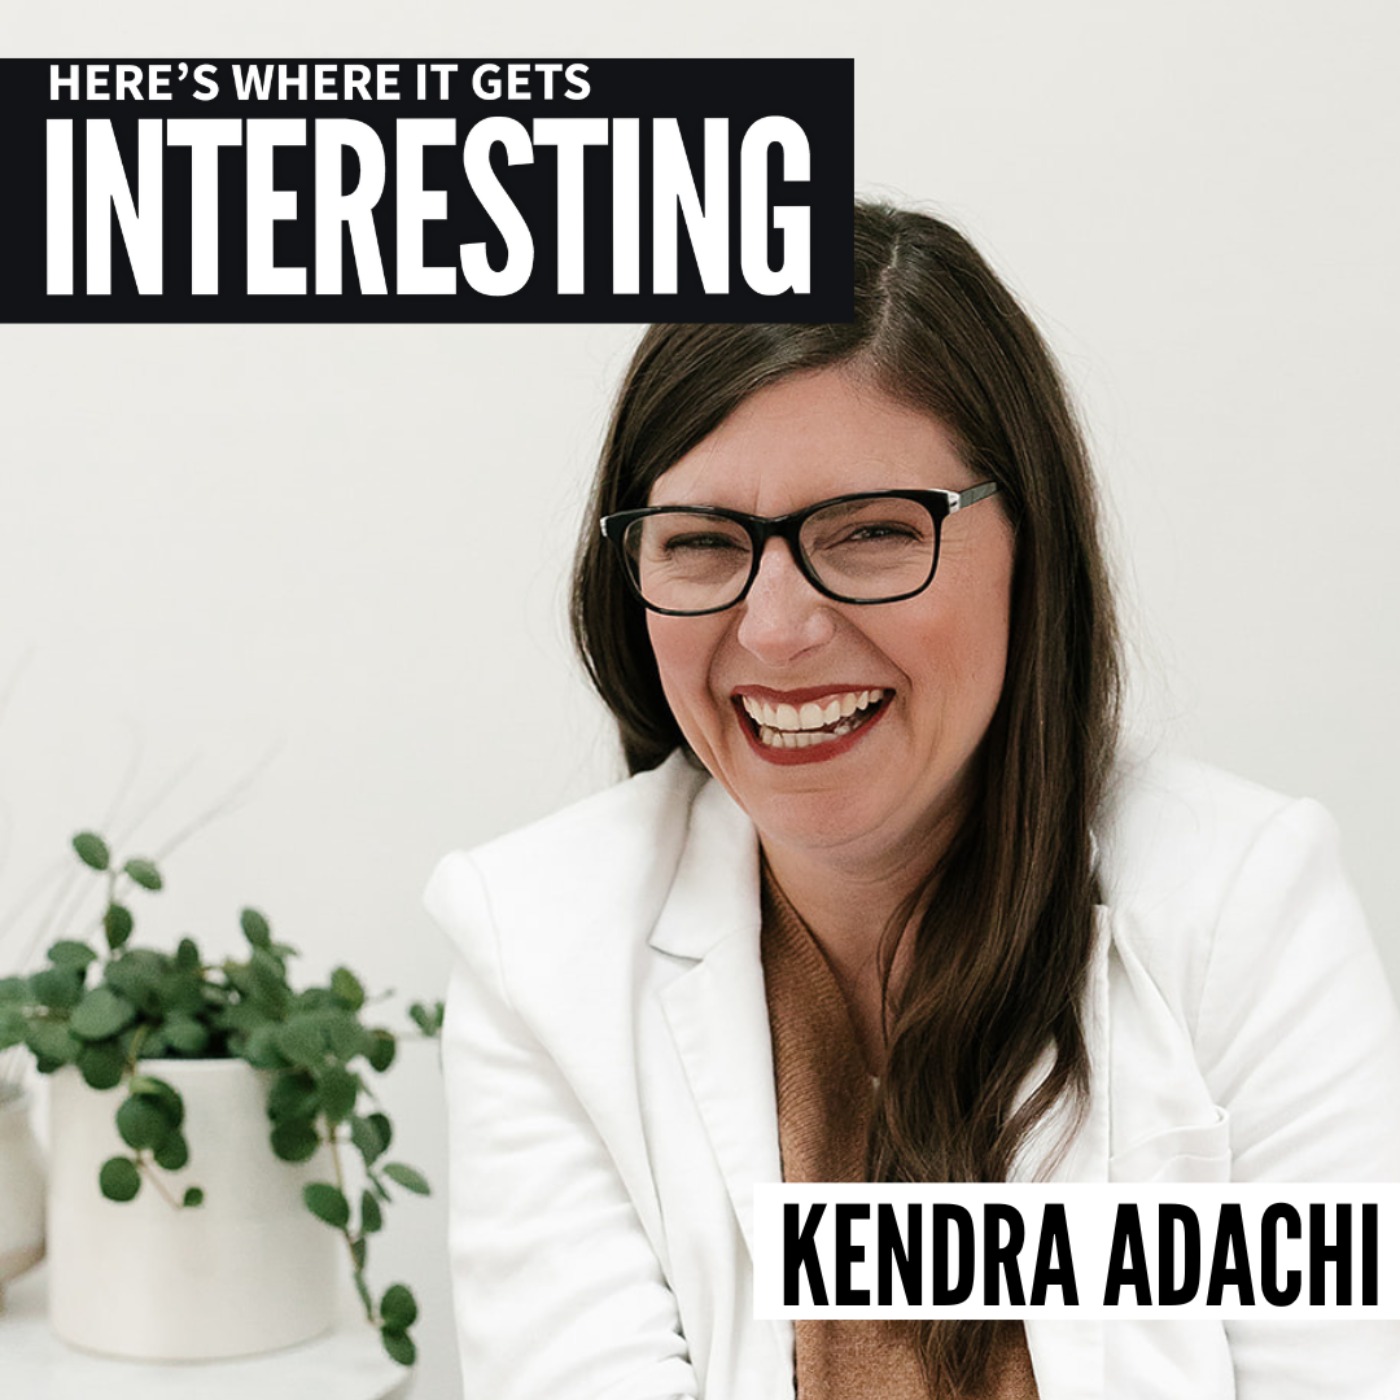 California: Father of National Parks with Kendra Adachi